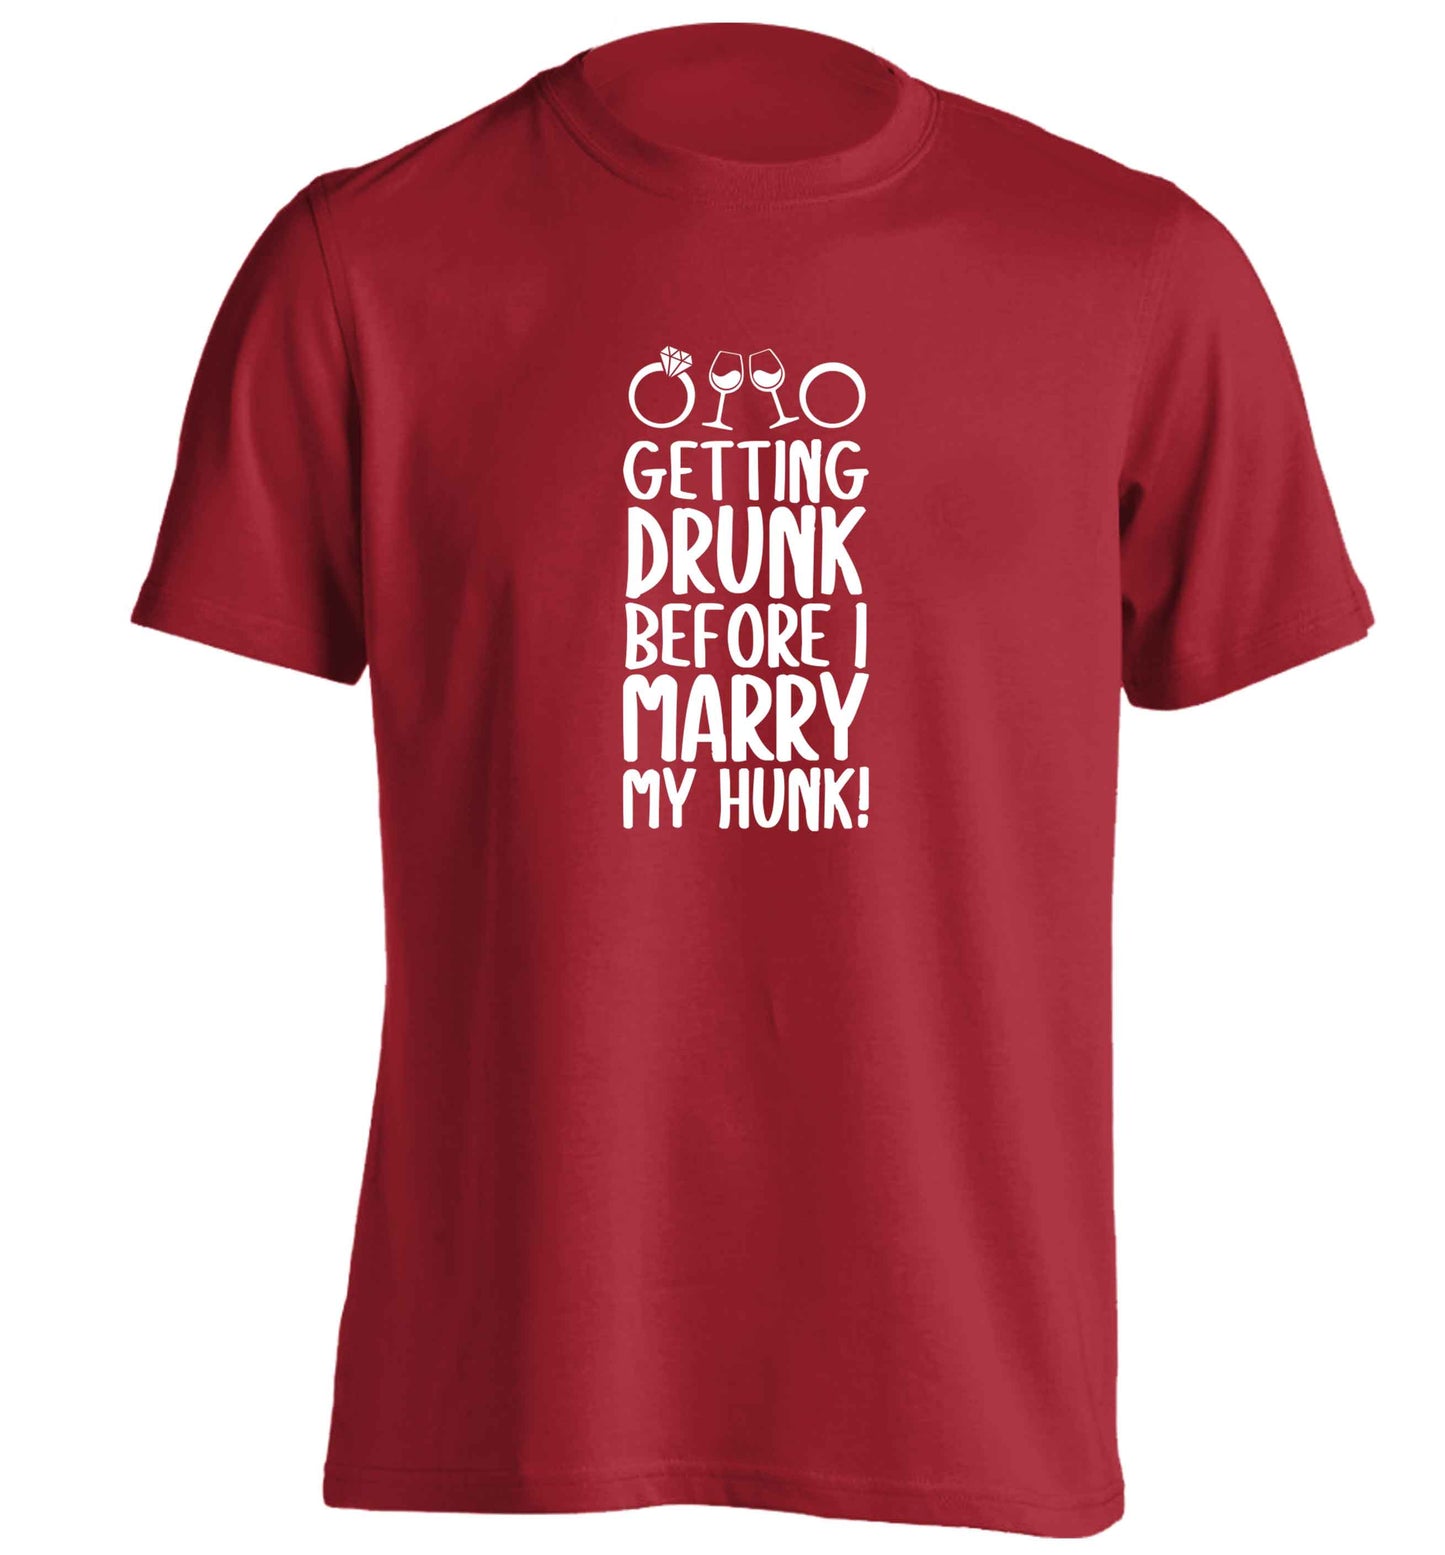 Getting drunk before I marry my hunk adults unisex red Tshirt 2XL